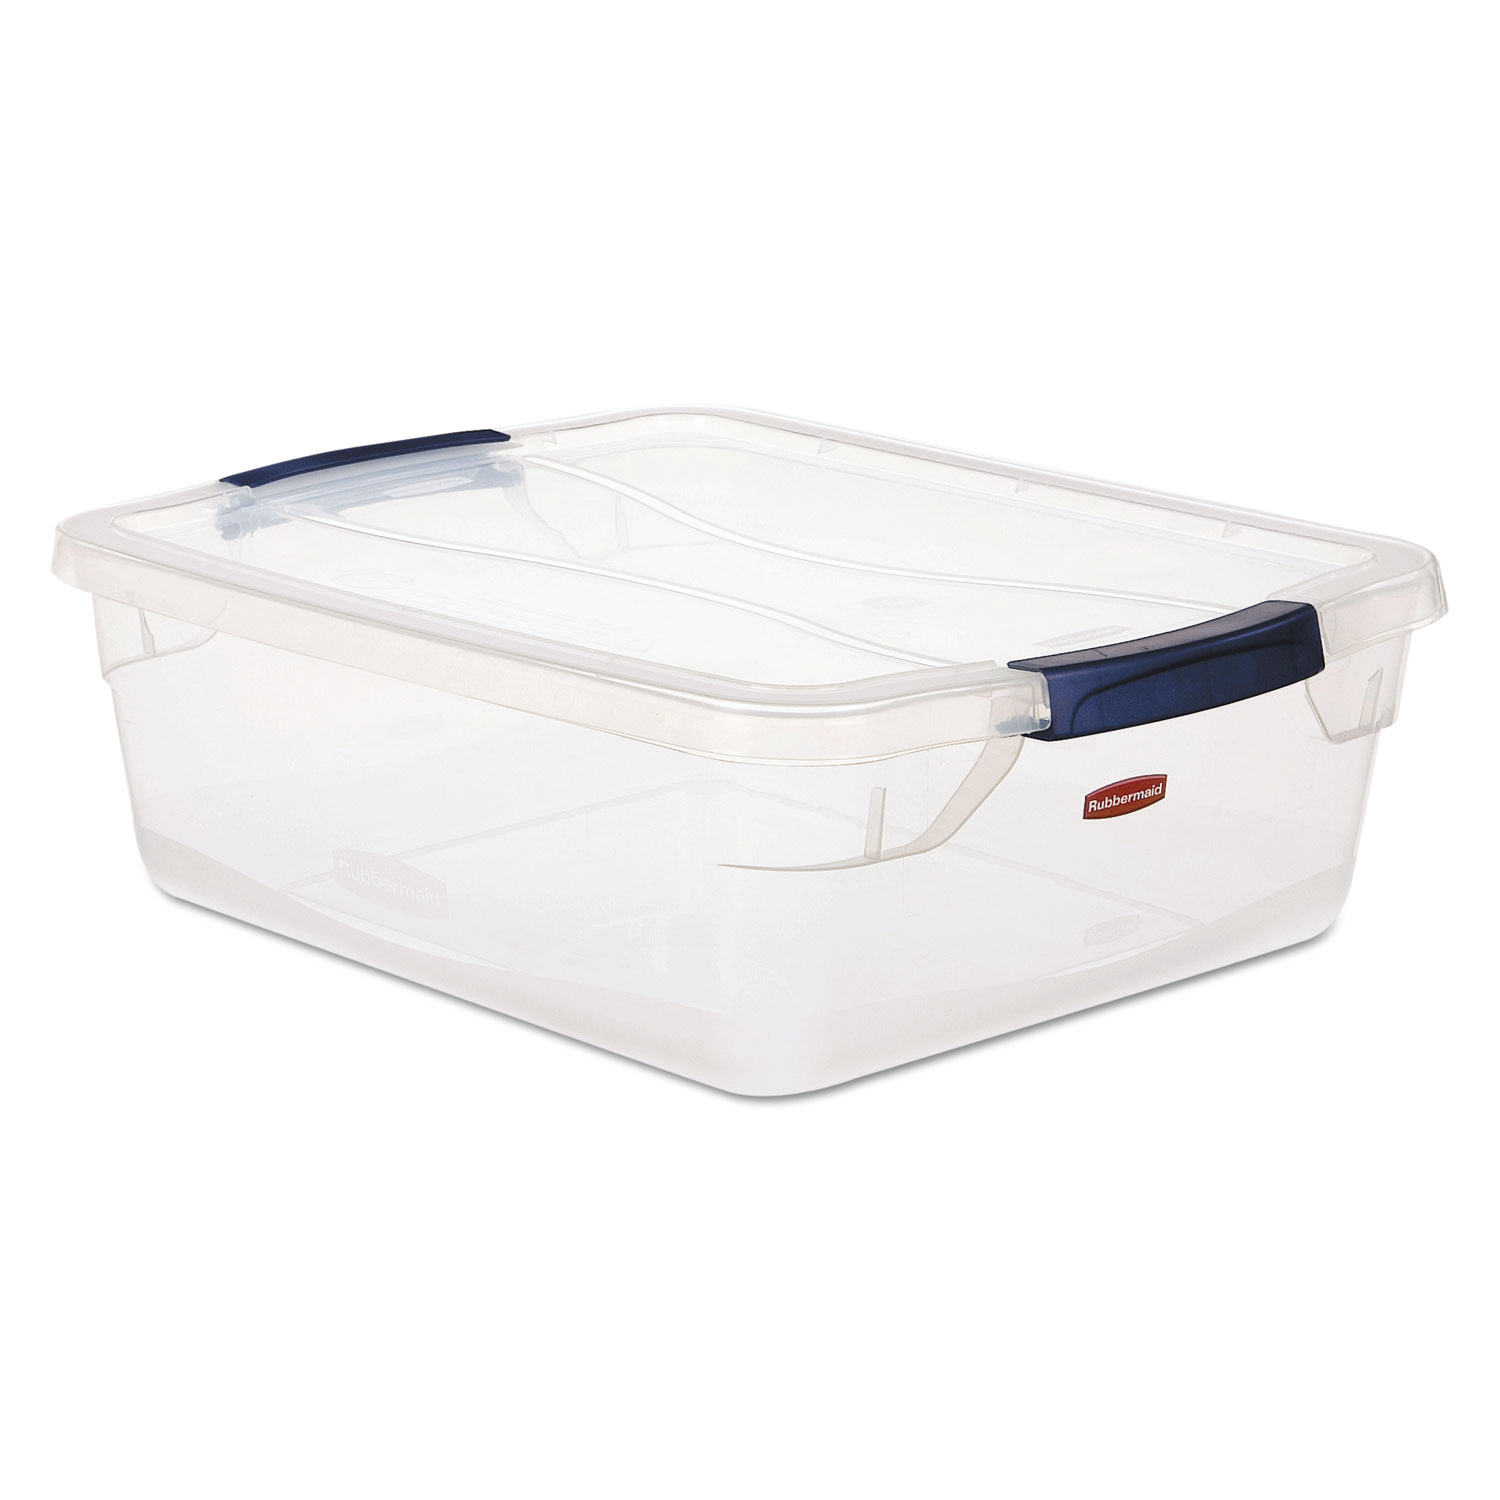  Rubbermaid RMCC710000 Clever Store Snap-Lid Container, 18 3/4 x 23 3/4 x 12 3/8, 71 qt, Clear, 4/CT (UNXRMCC710003) 